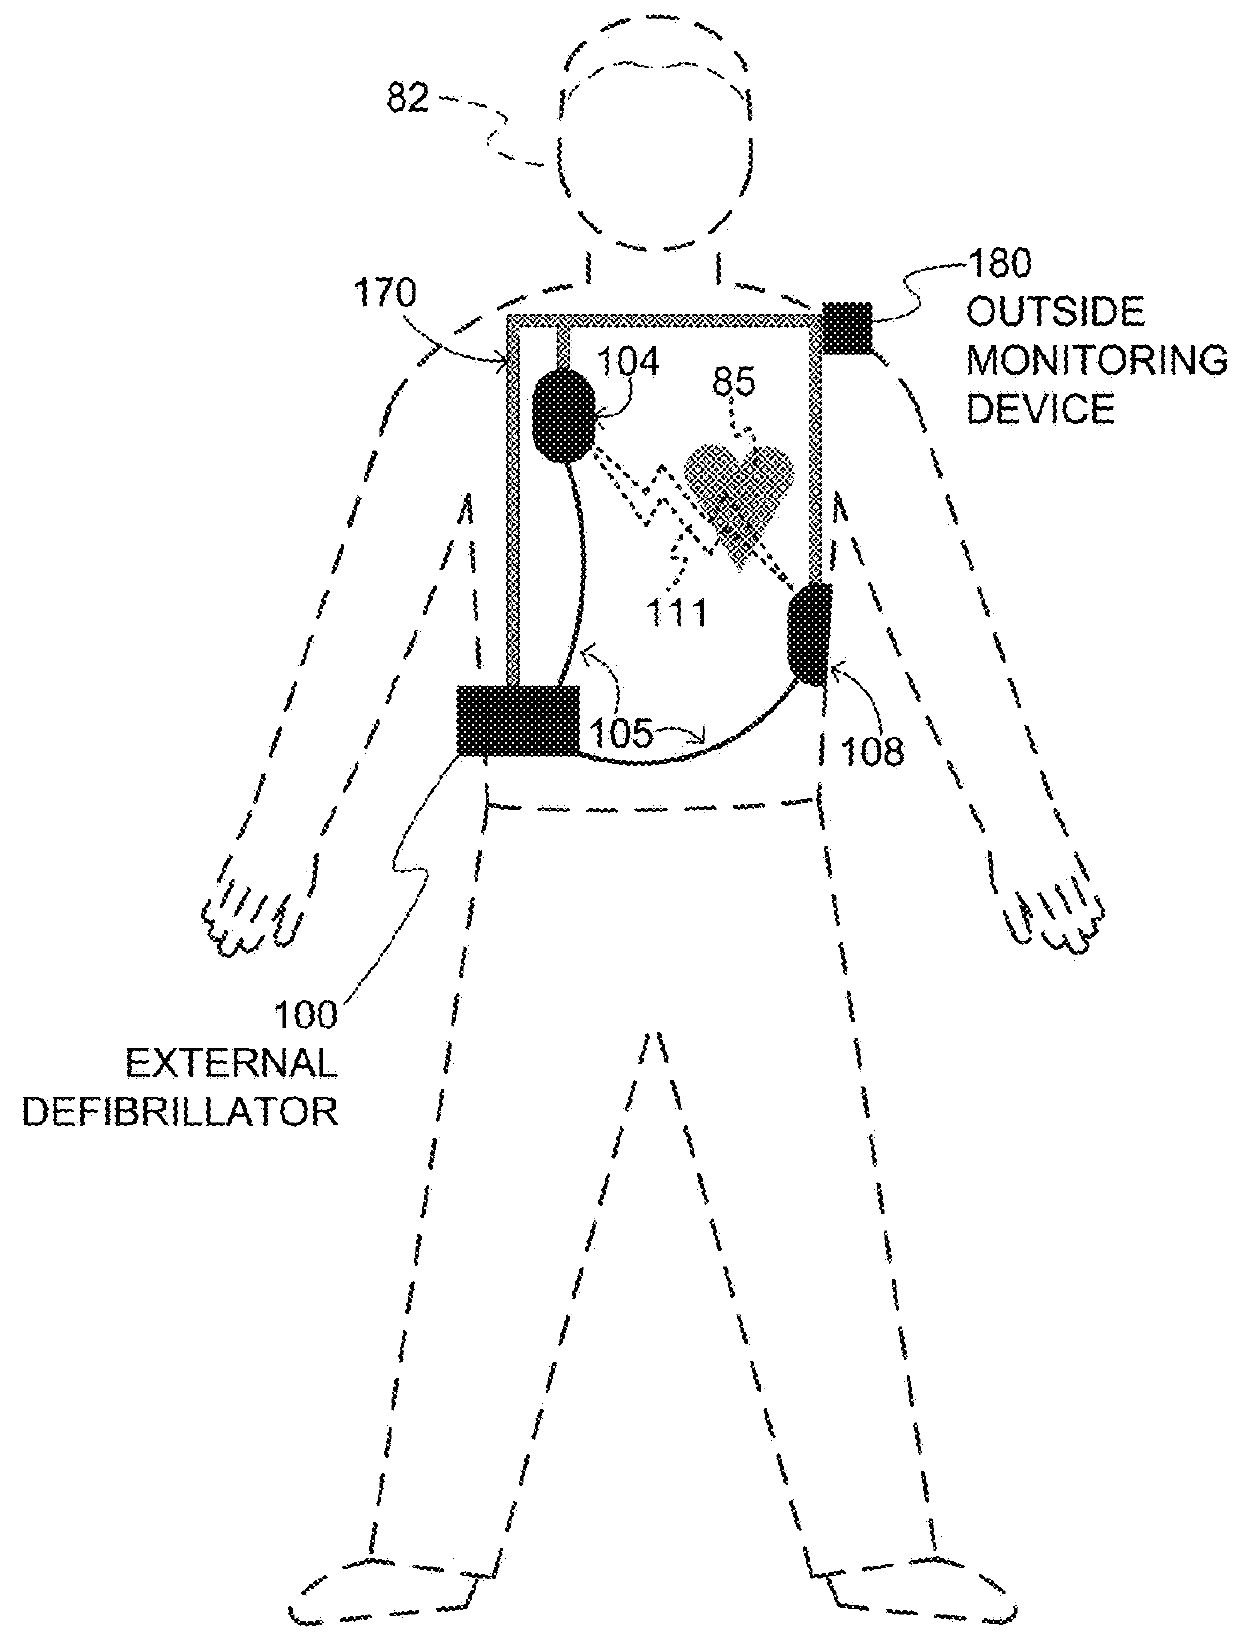 Wearable cardioverter defibrillator (WCD) system evaluating its ECG signals for noise according to tall peak counts